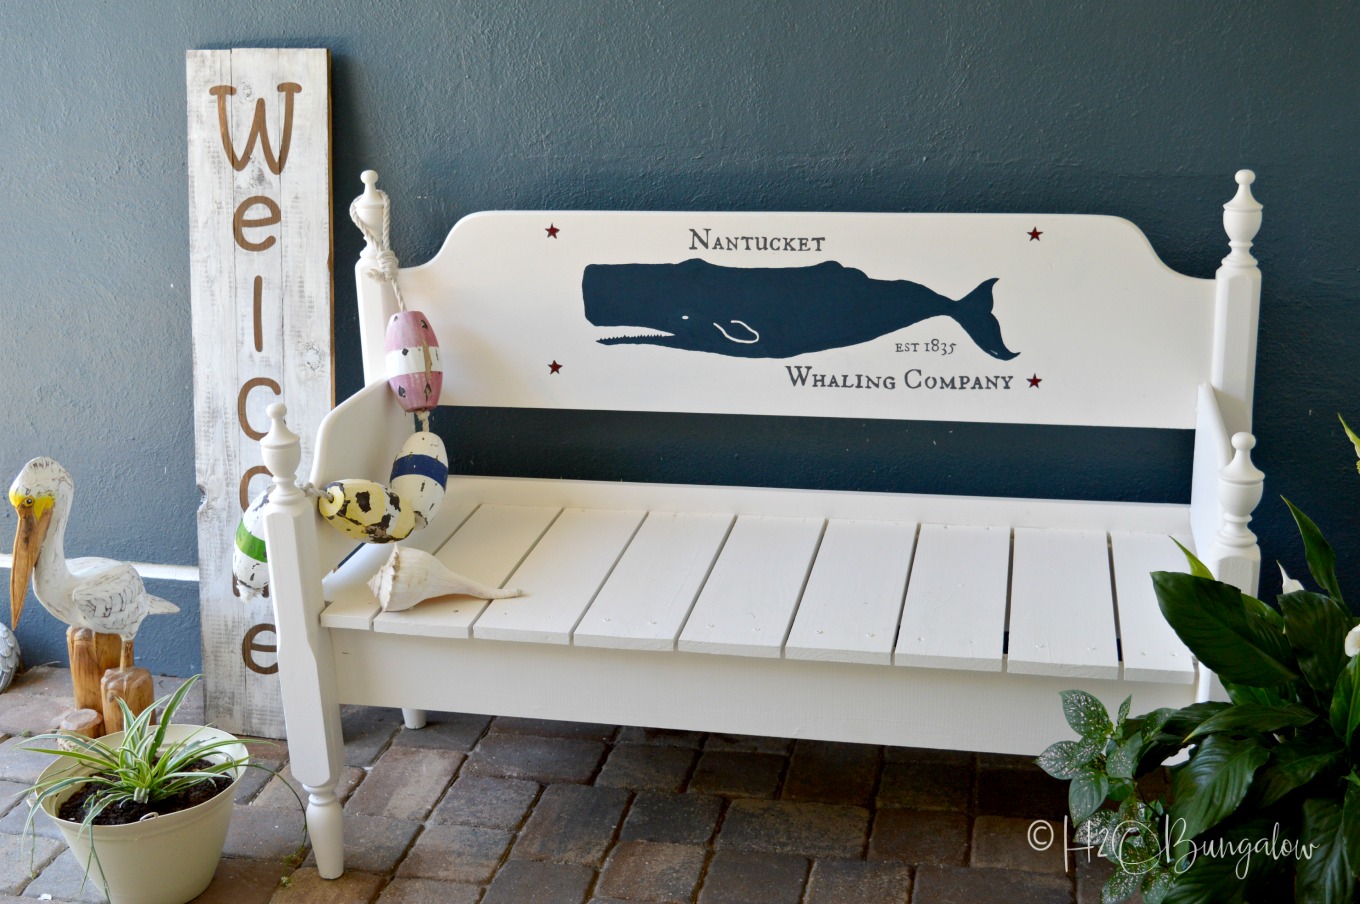 How to paint graphics on furniture video and blog tutorial. Download my whale design or follow my steps to create, enlarge and transfer your design to paint on furniture, a sign or any flat surface. You'll find an awesome list of resources in this post too! 